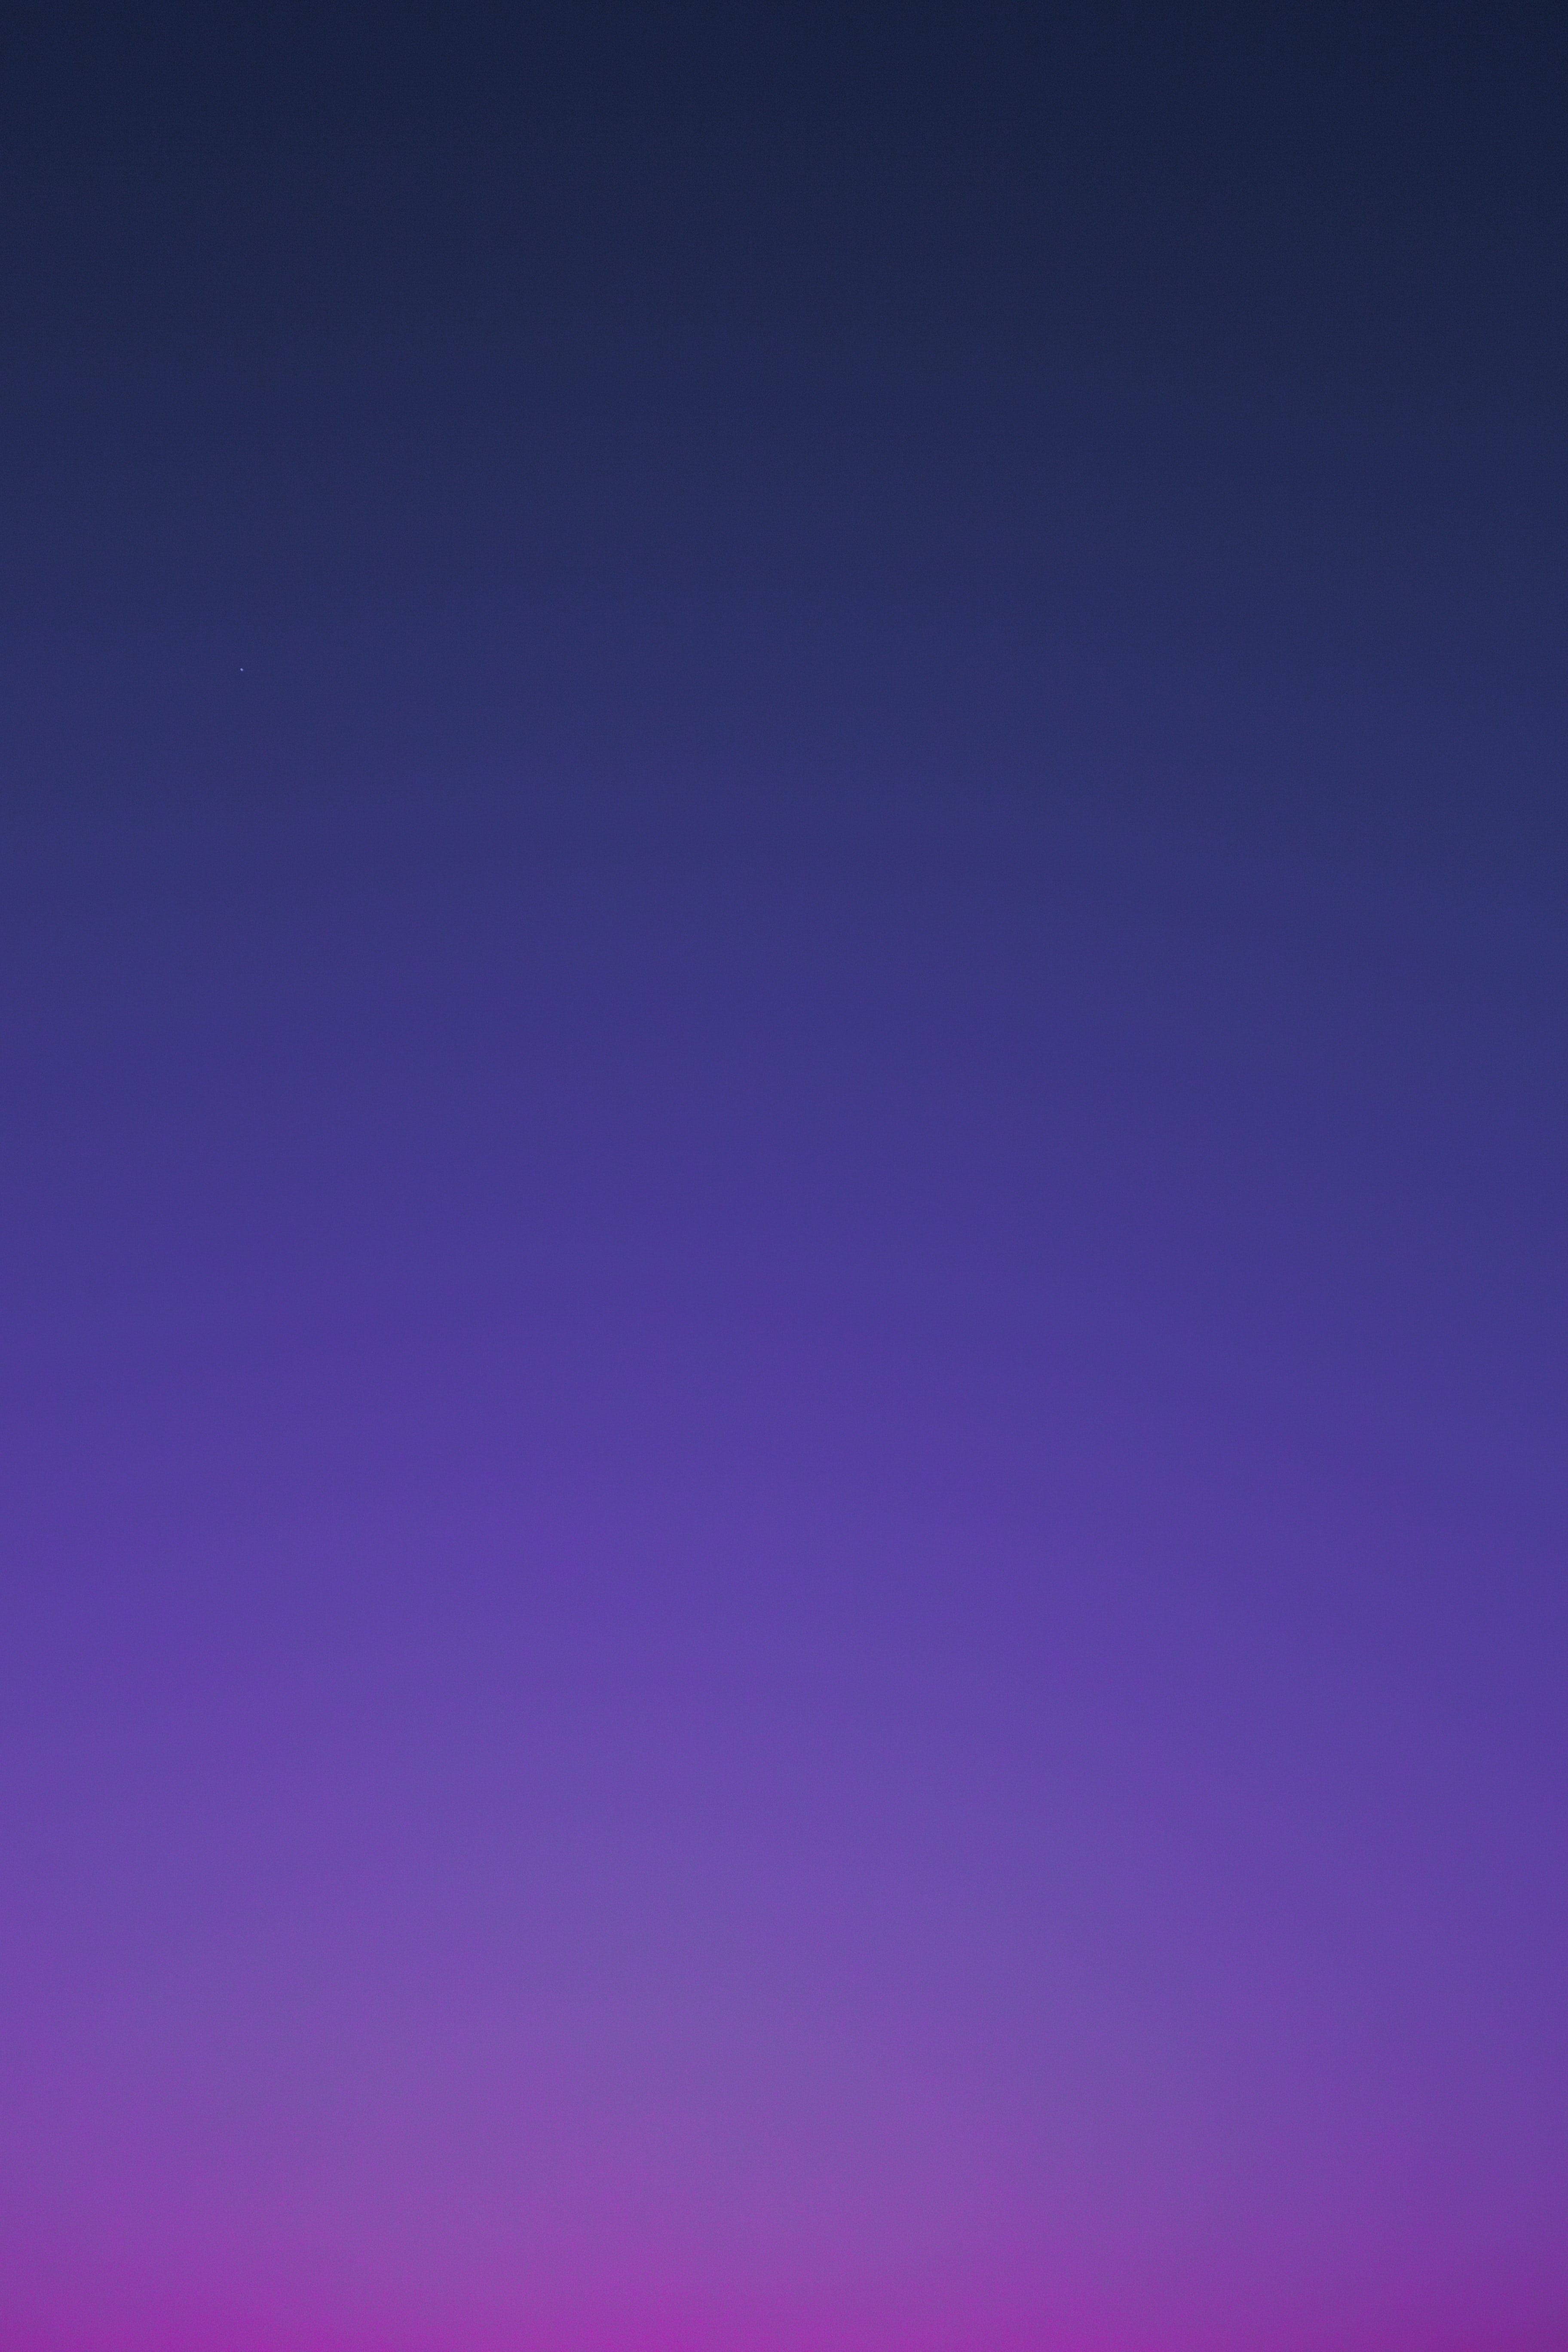 android gradient, purple, violet, nature, sky, evening